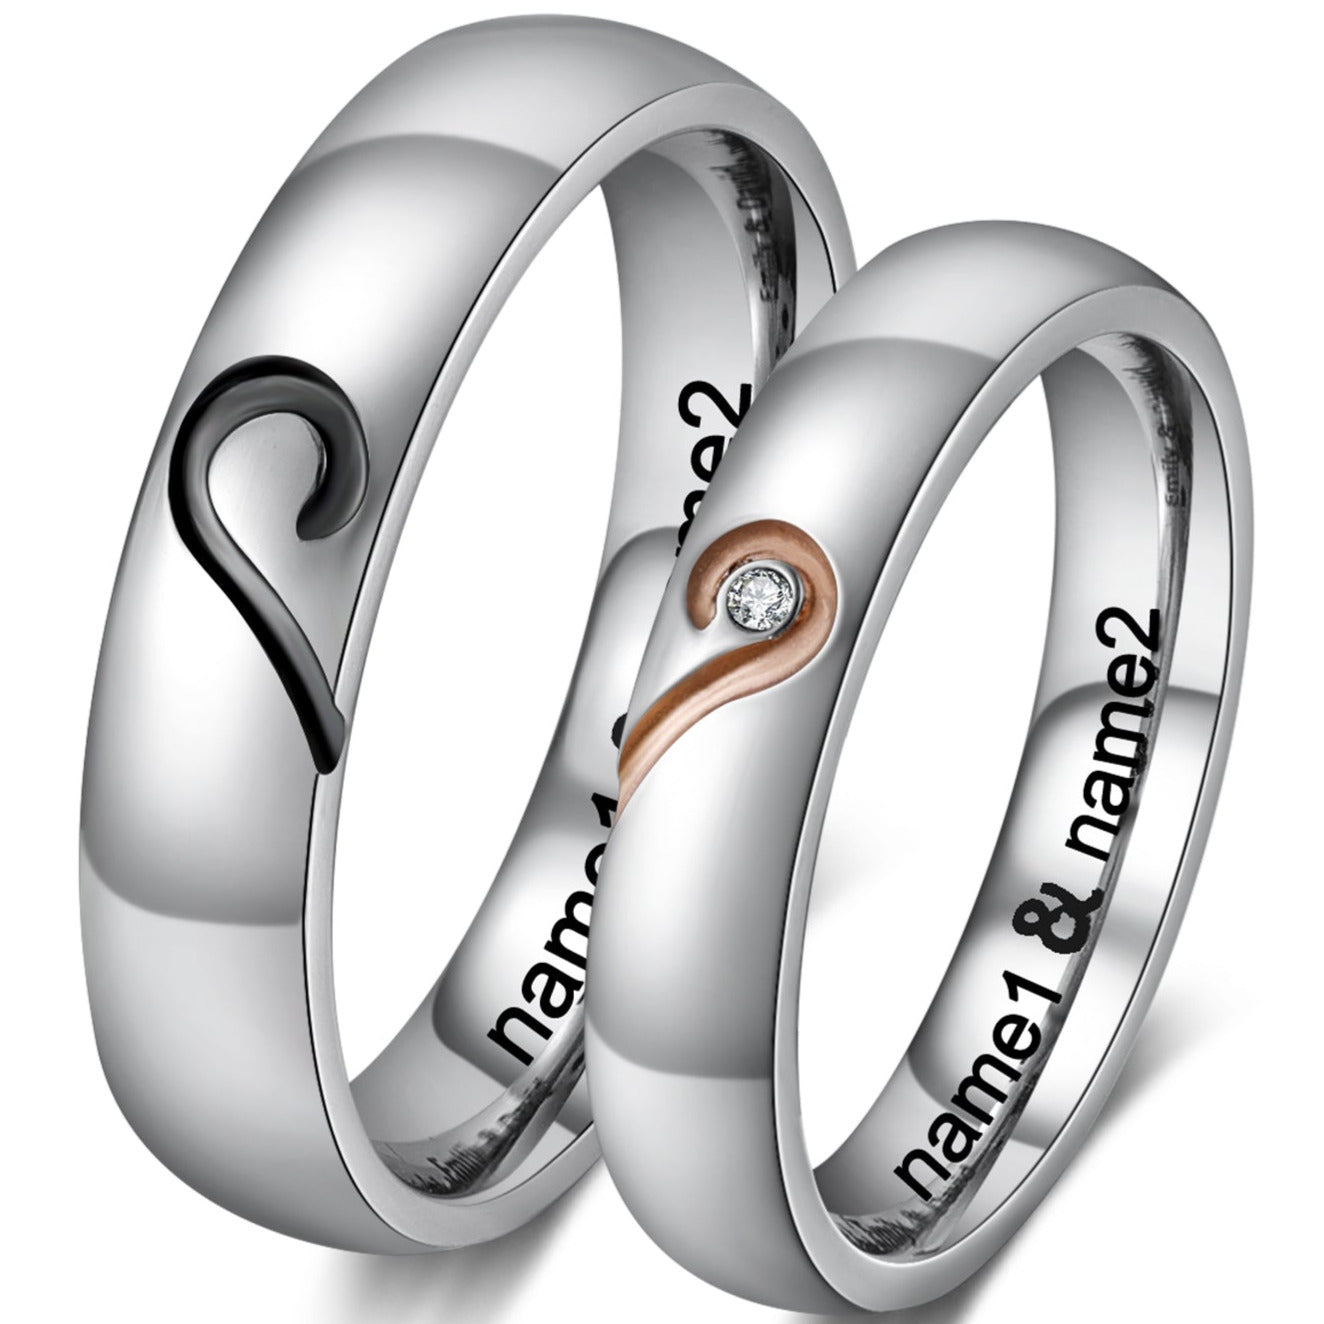 Think Engraved wedding Ring 8 / 5 Personalized His and Hers Promise or Wedding Ring Set Matching Hearts Couples Rings